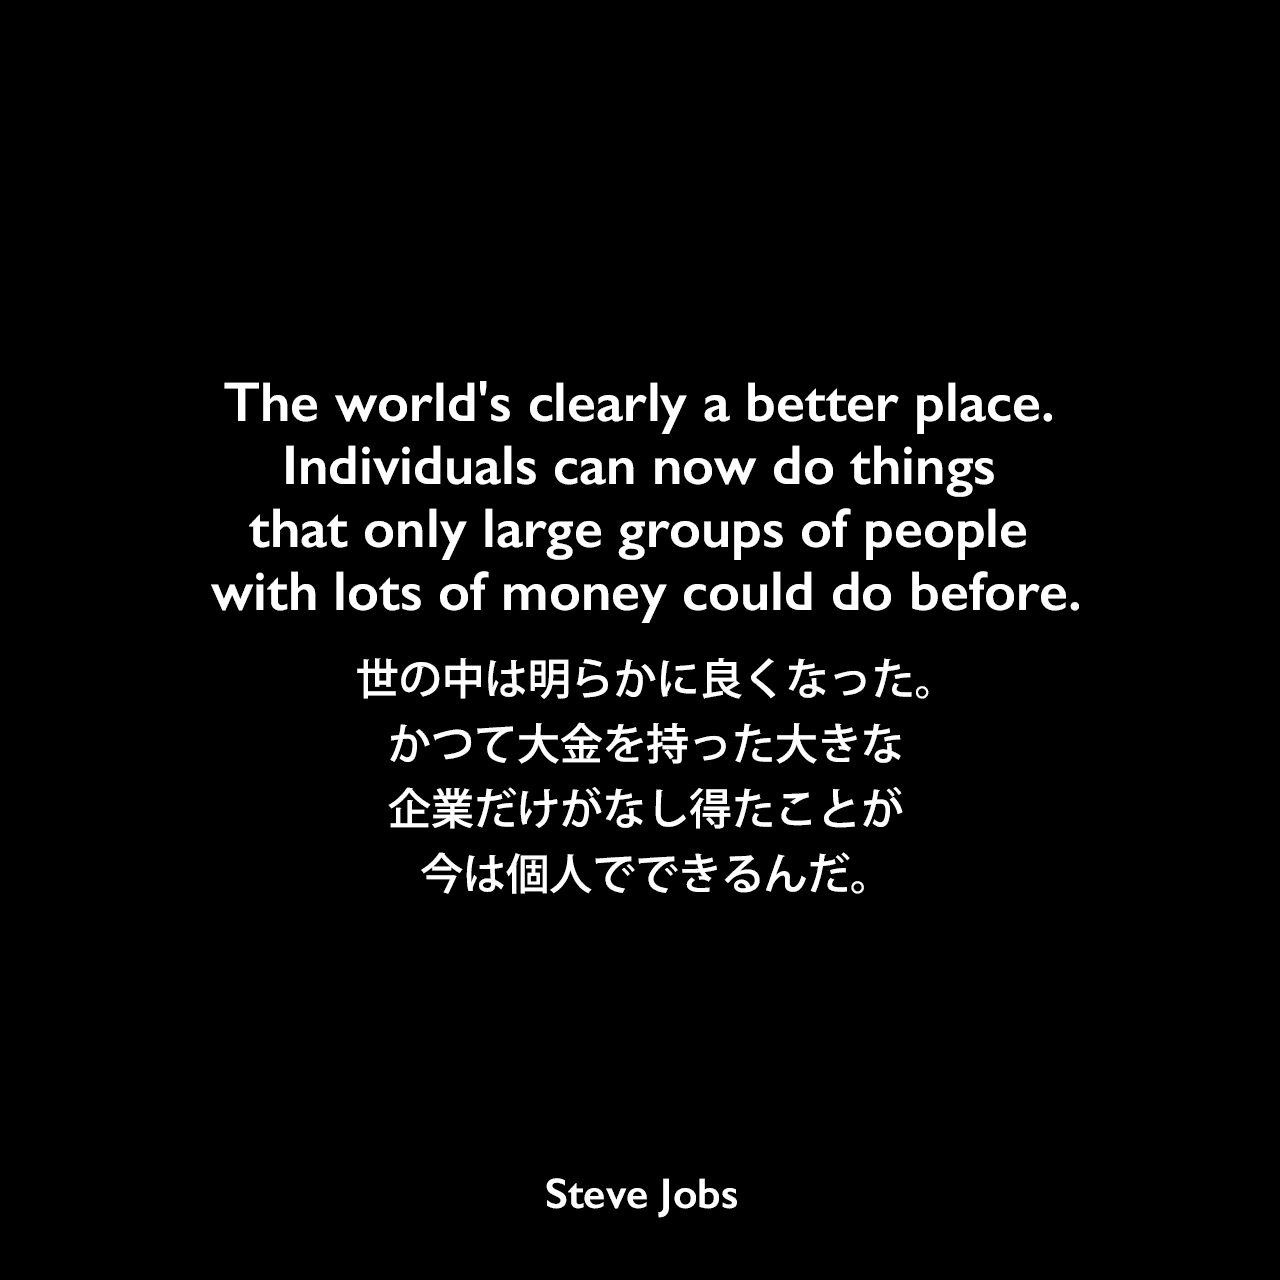 The world's clearly a better place. Individuals can now do things that only large groups of people with lots of money could do before.世の中は明らかに良くなった。かつて大金を持った大きな企業だけがなし得たことが今は個人でできるんだ。- 1994年6月16日 ローリング・ストーン・マガジン No. 684よりSteve Jobs